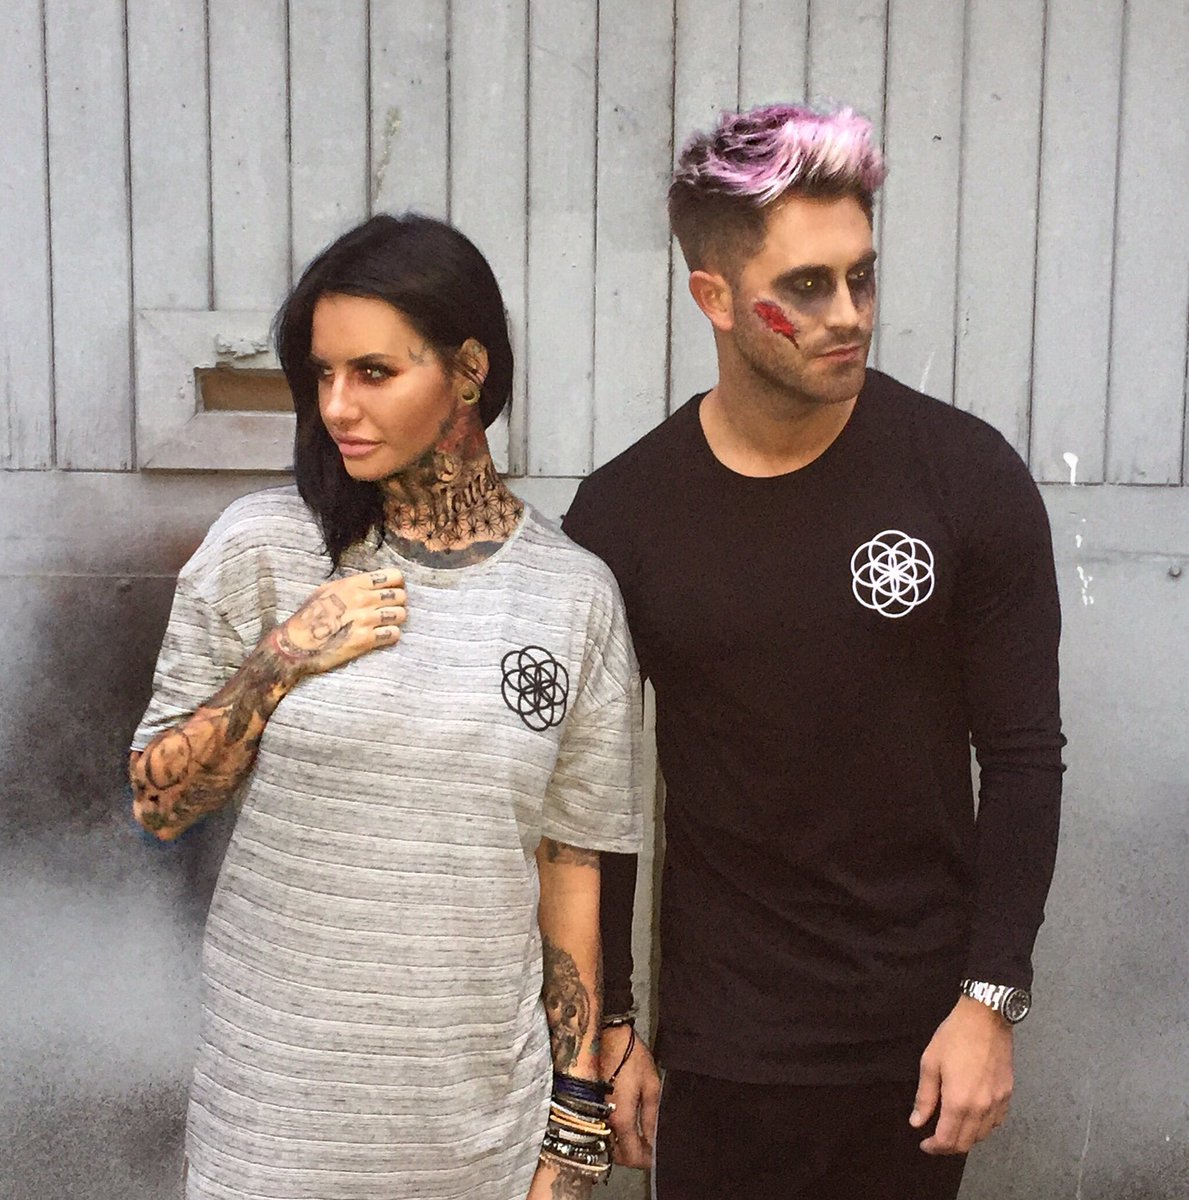 Chilling with @rossworswick in our new scartissue tops. new collection https://t.co/tKdkAfUkk9 @scartissueuk https://t.co/ZvhFtejFXD